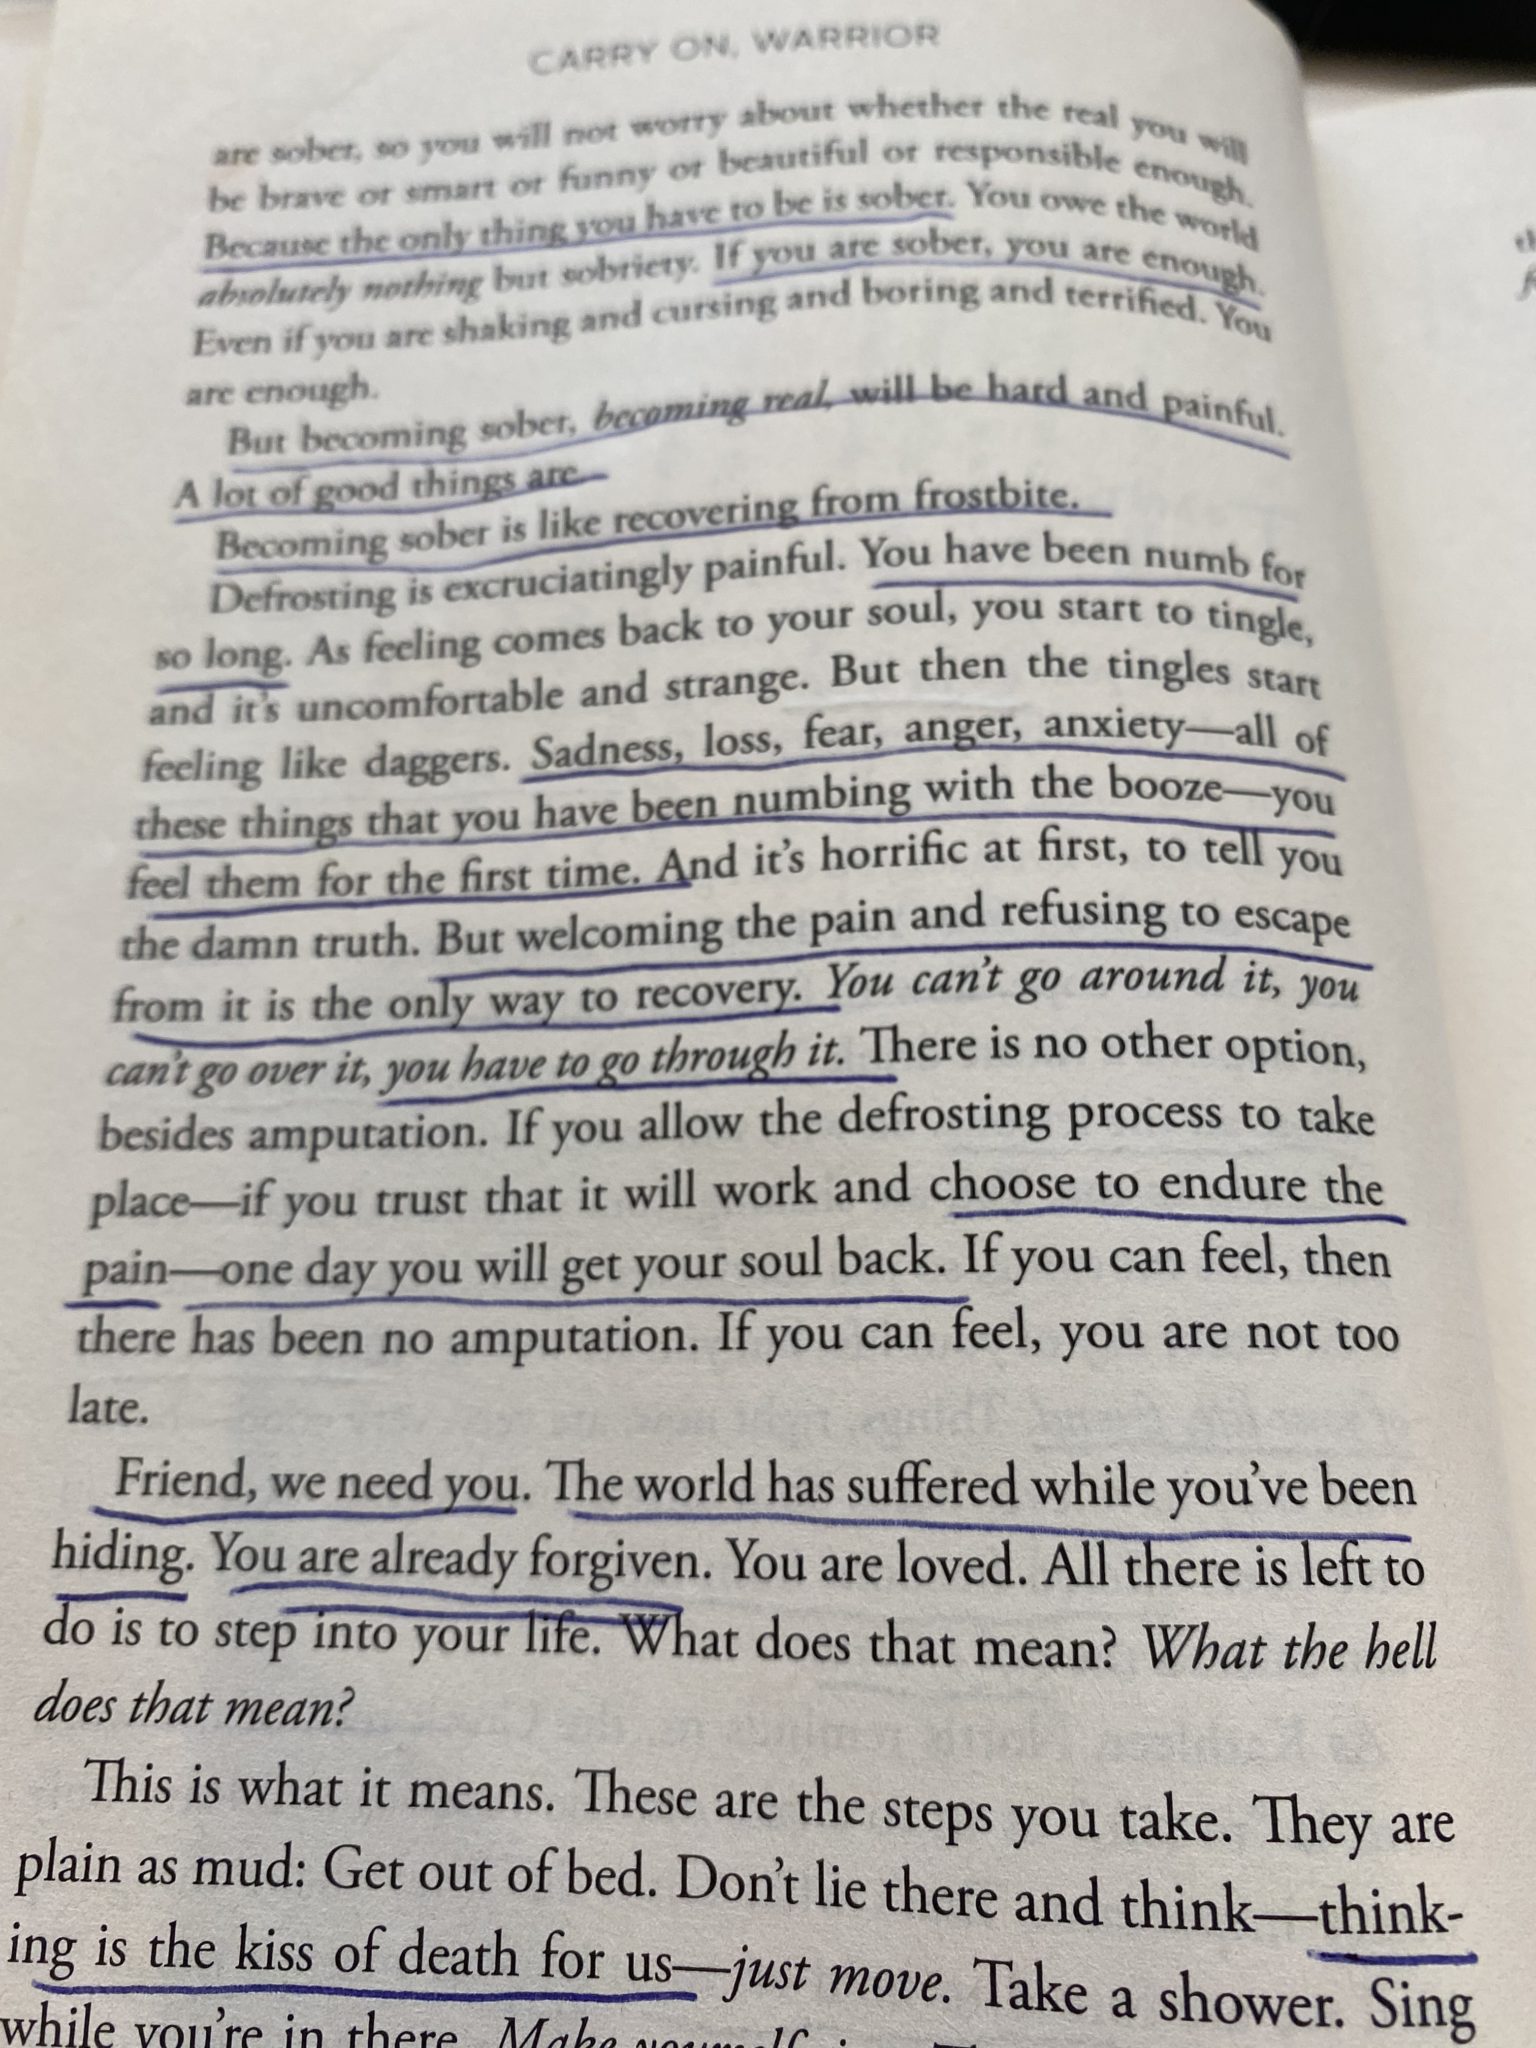 Glennon Doyle, To My Friend On Her First Sober Morning - Carry On, Warrior